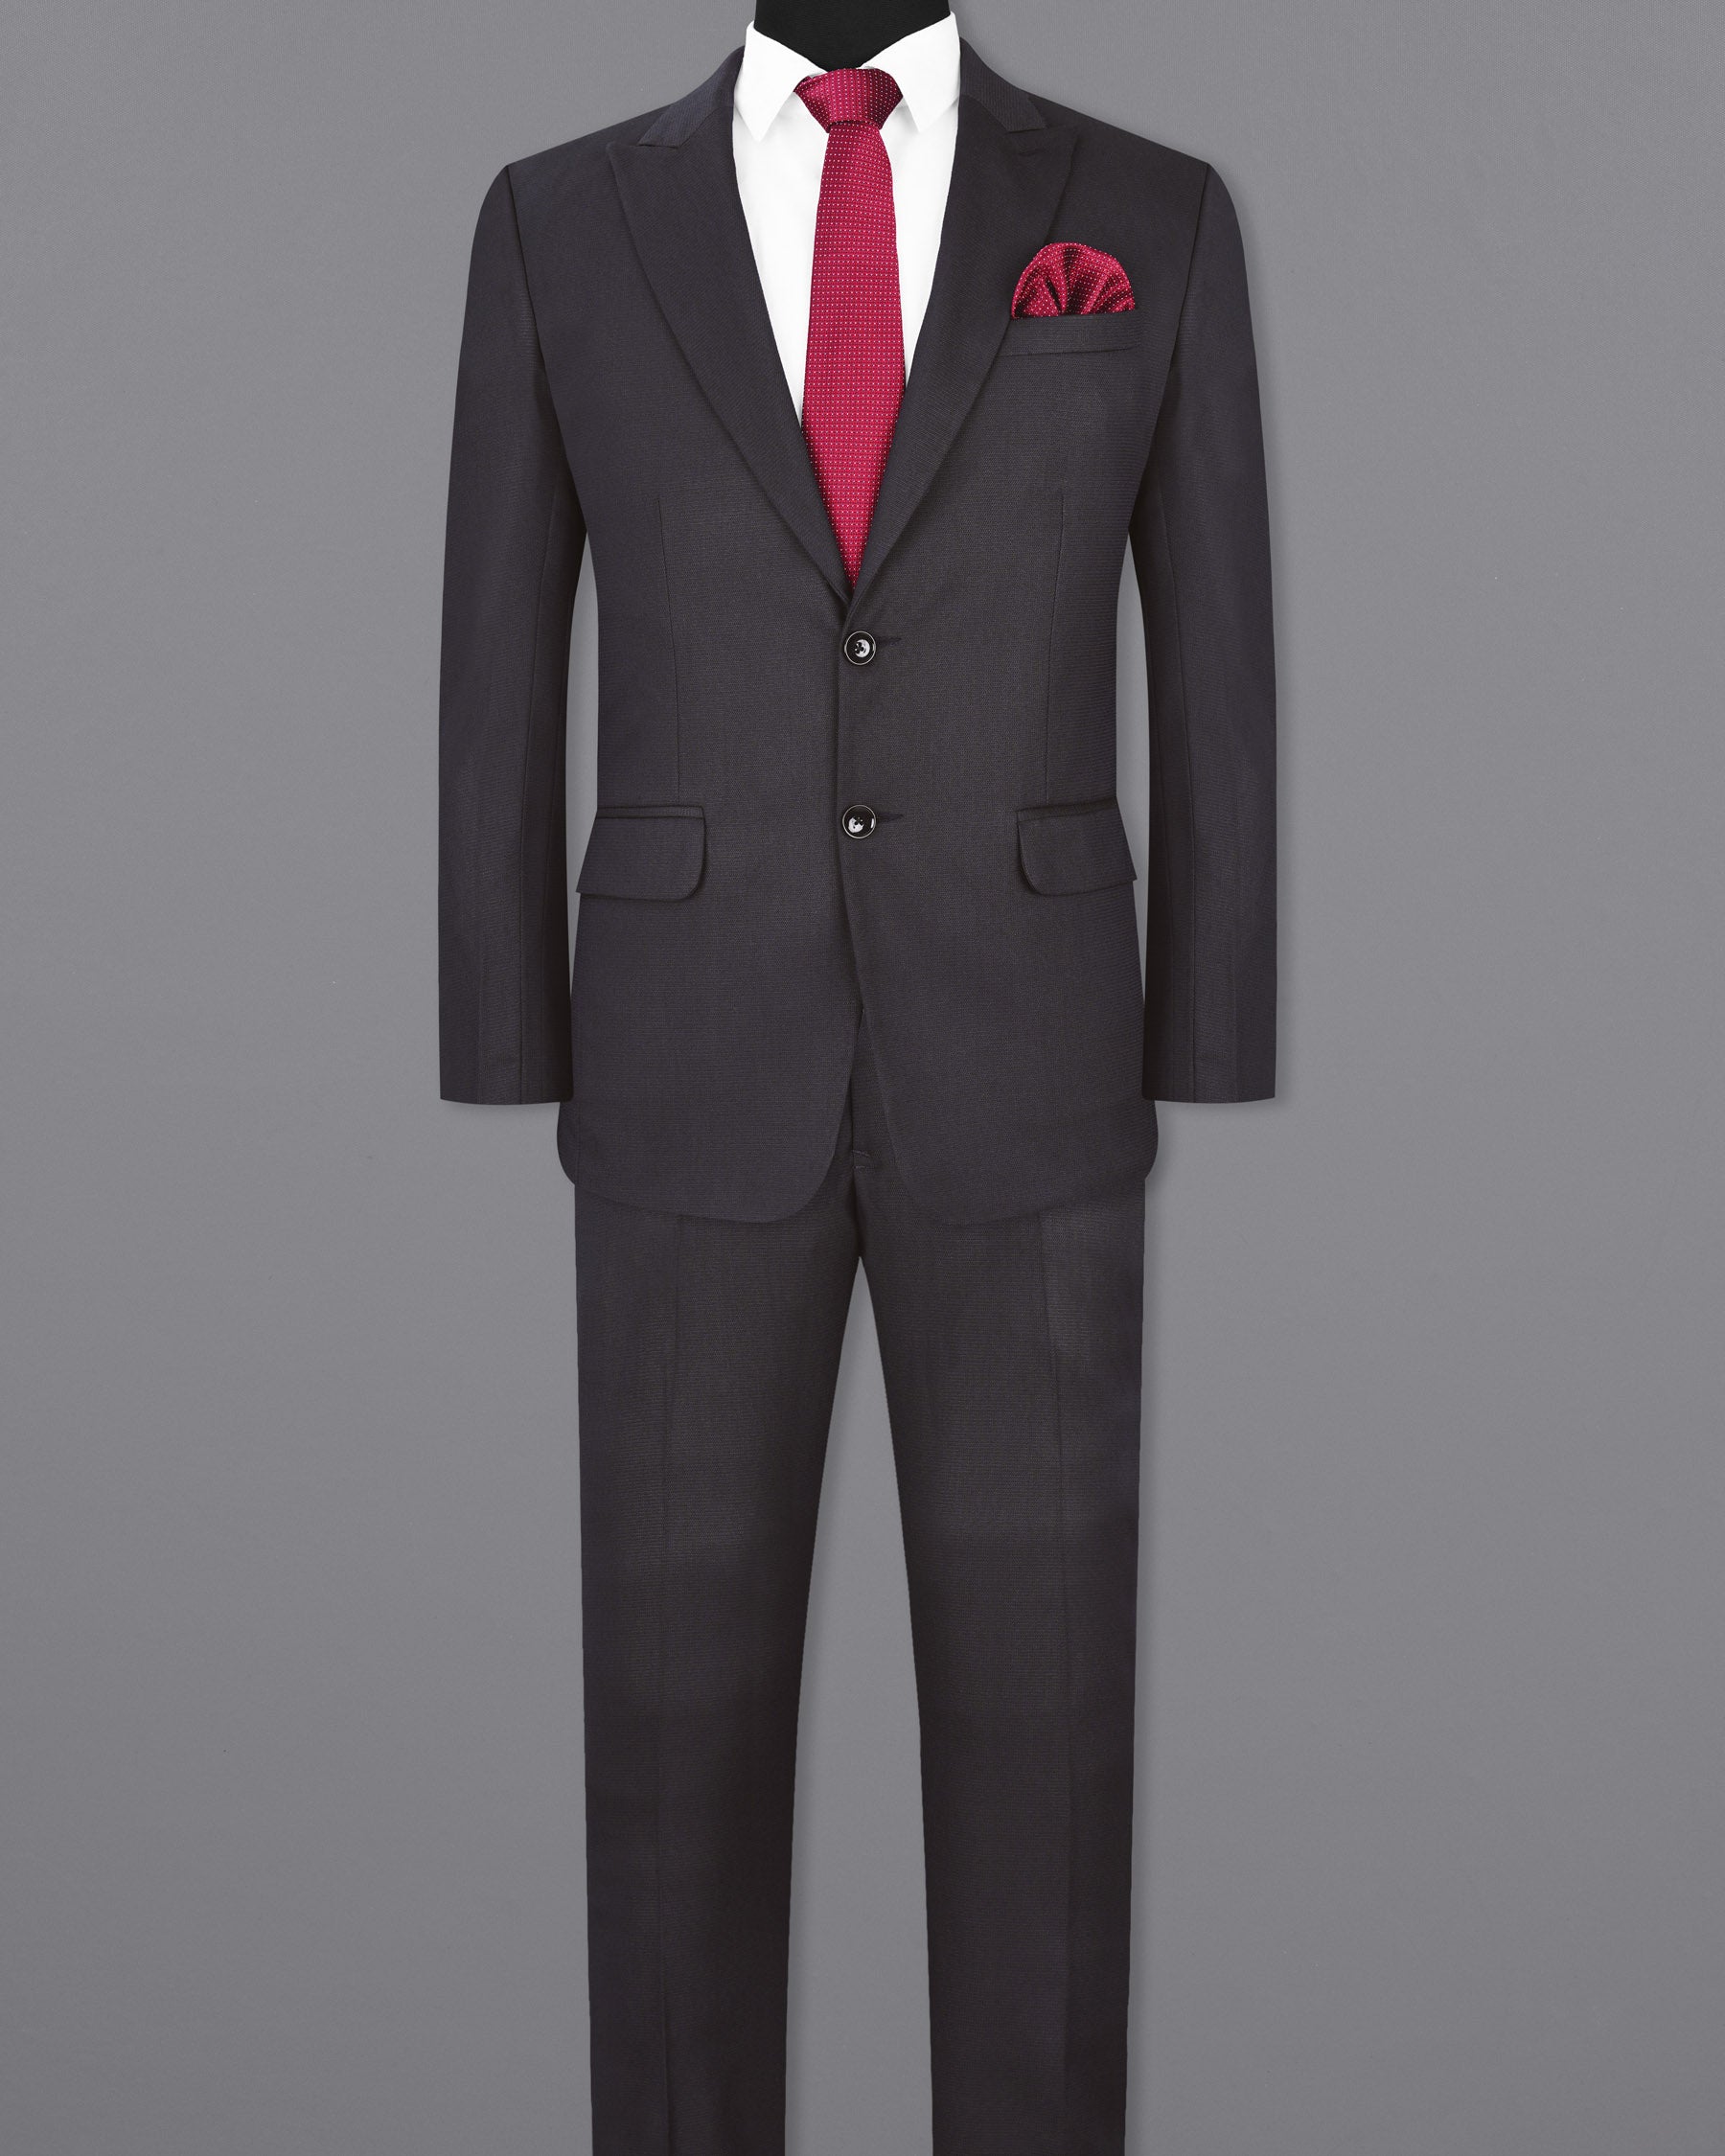 Gravel Gray Single Breasted Suit